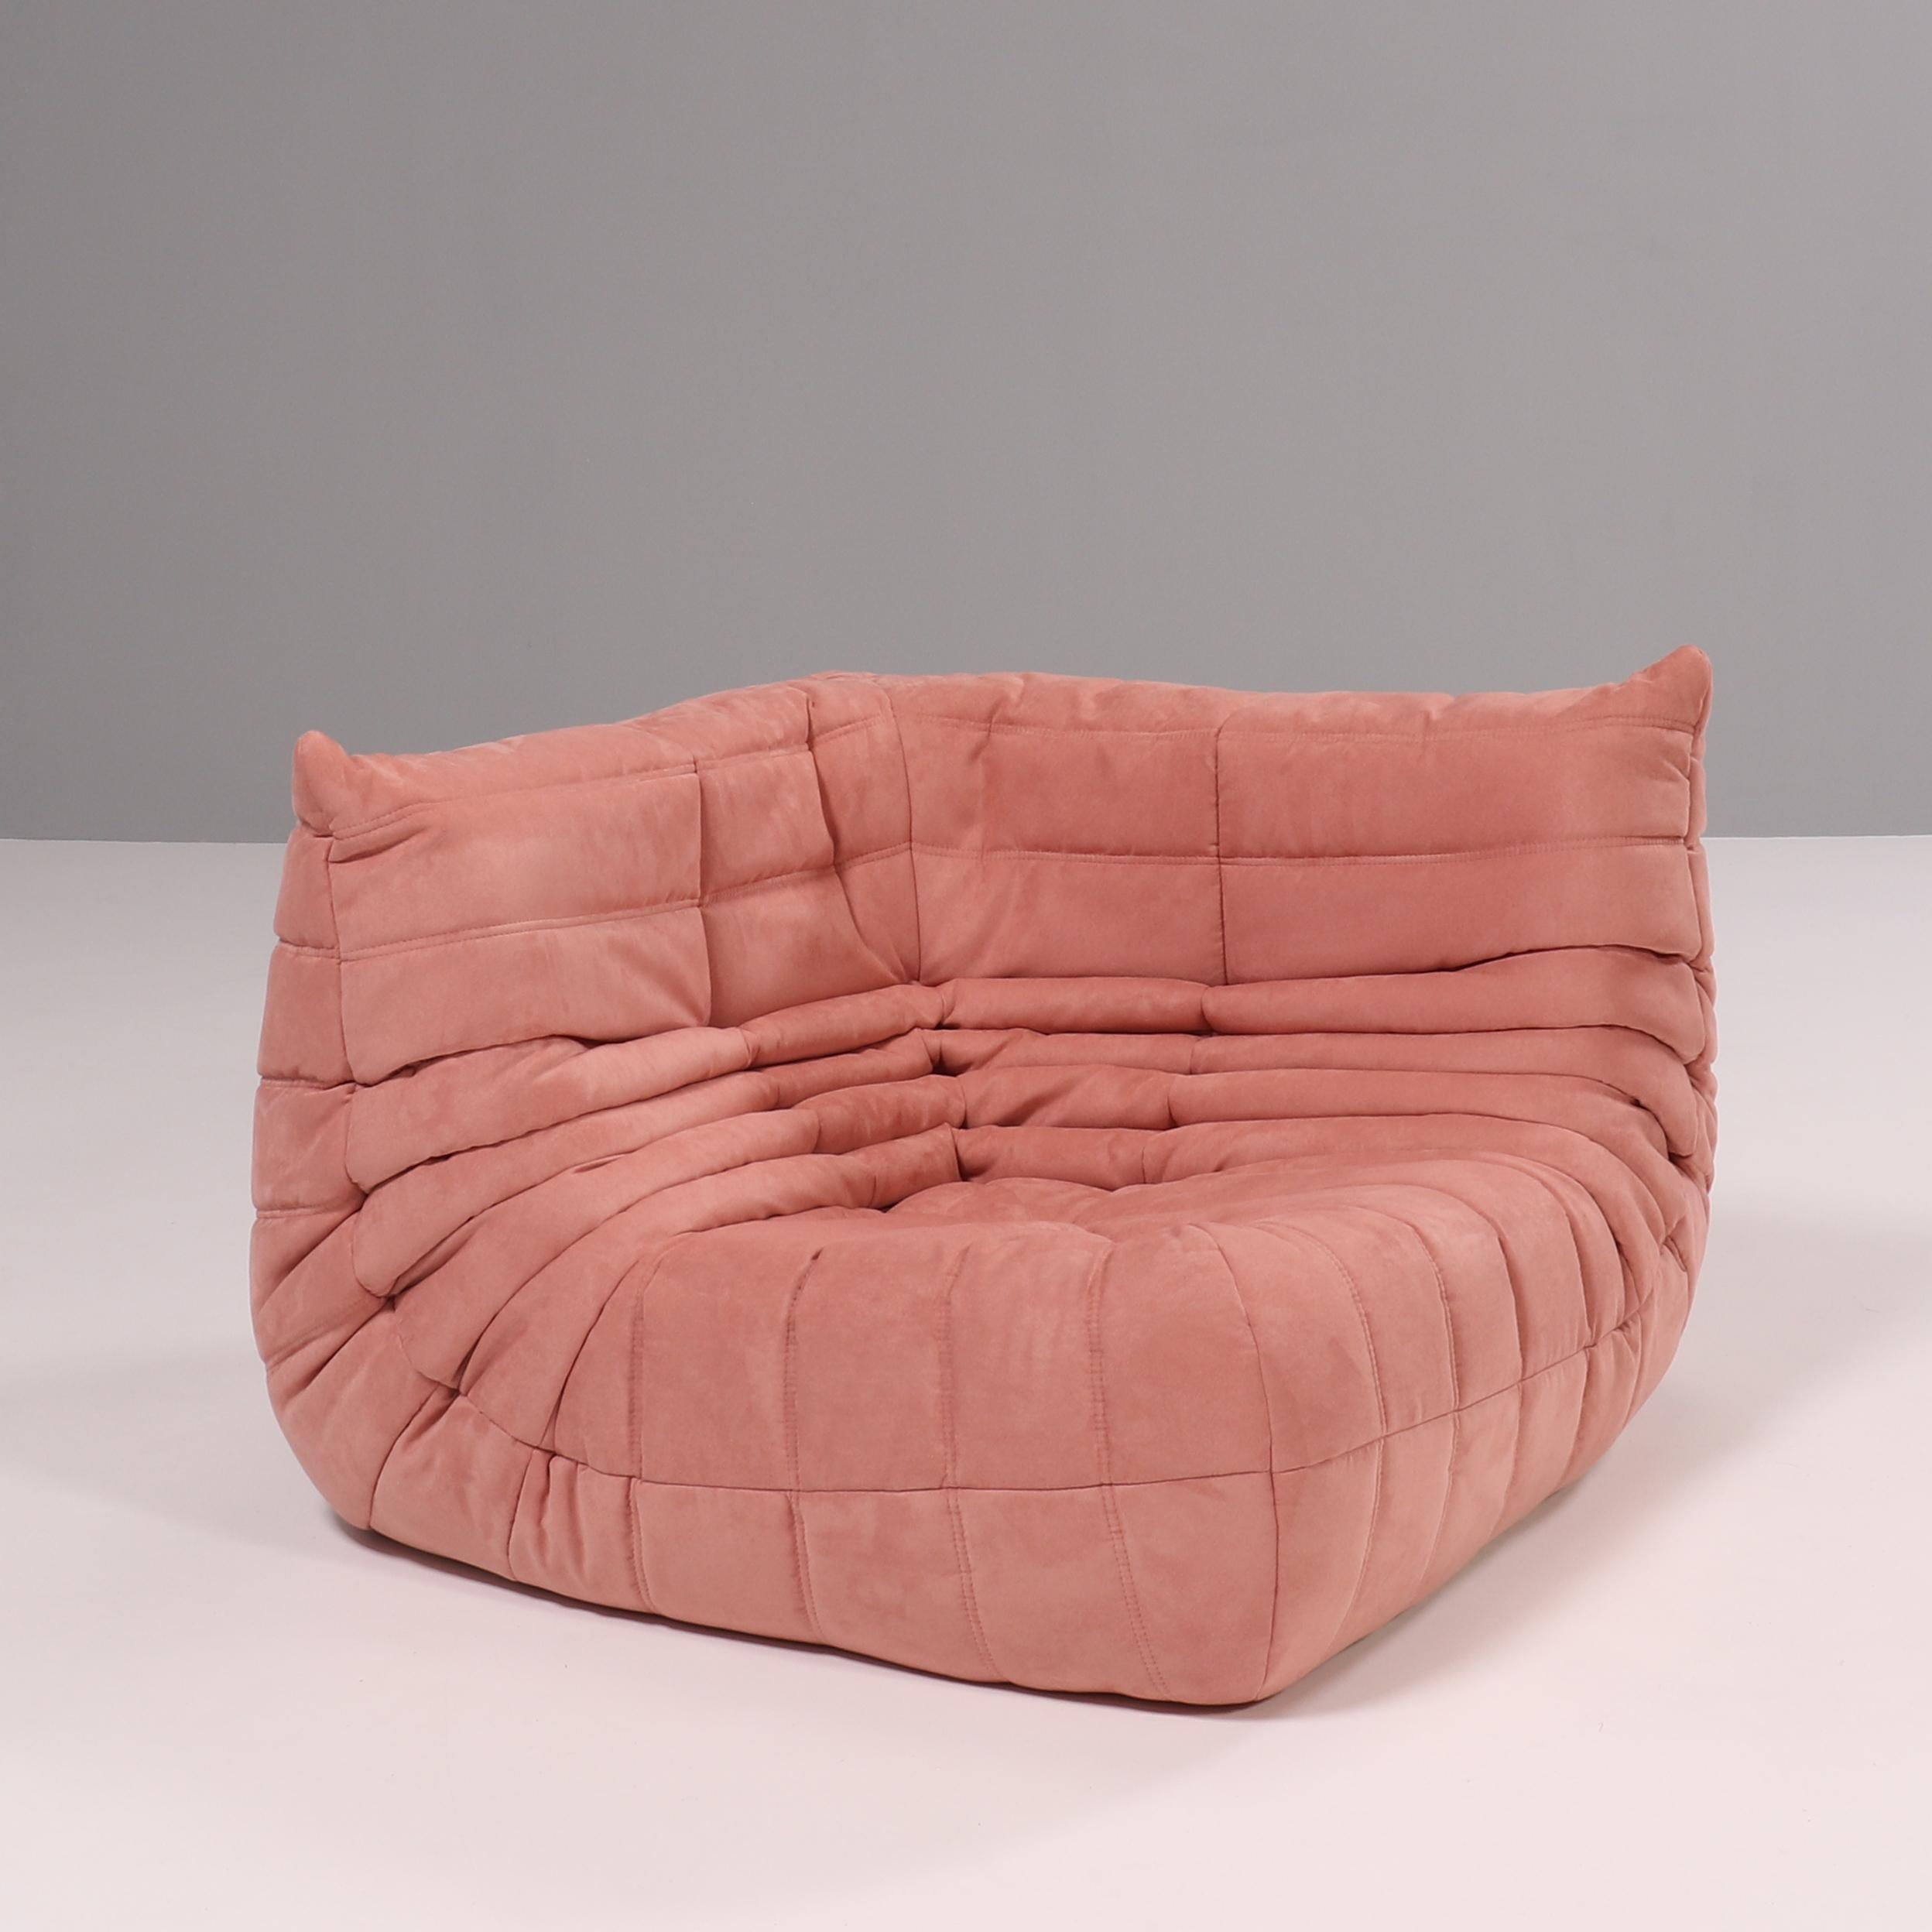 Late 20th Century Ligne Roset by Michel Ducaroy Togo Pink Modular Sofa and Footstool, Set of 3